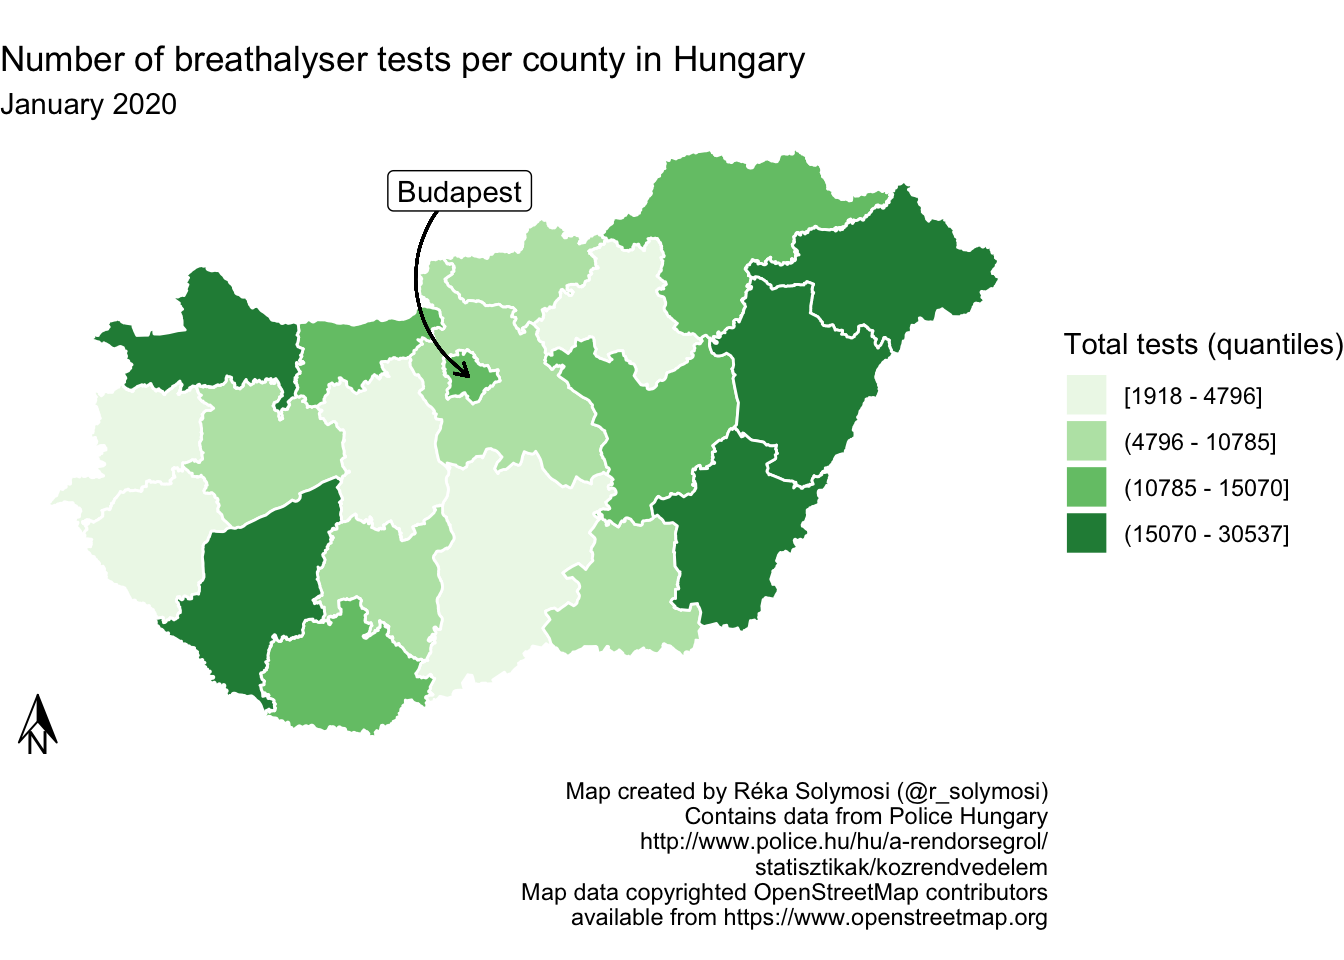 Once more the same green map of Hungary's counties has had an addition, a small half white half black arrow pointing upwards in the bottom left corner, with the letter 'N' for north underneath.